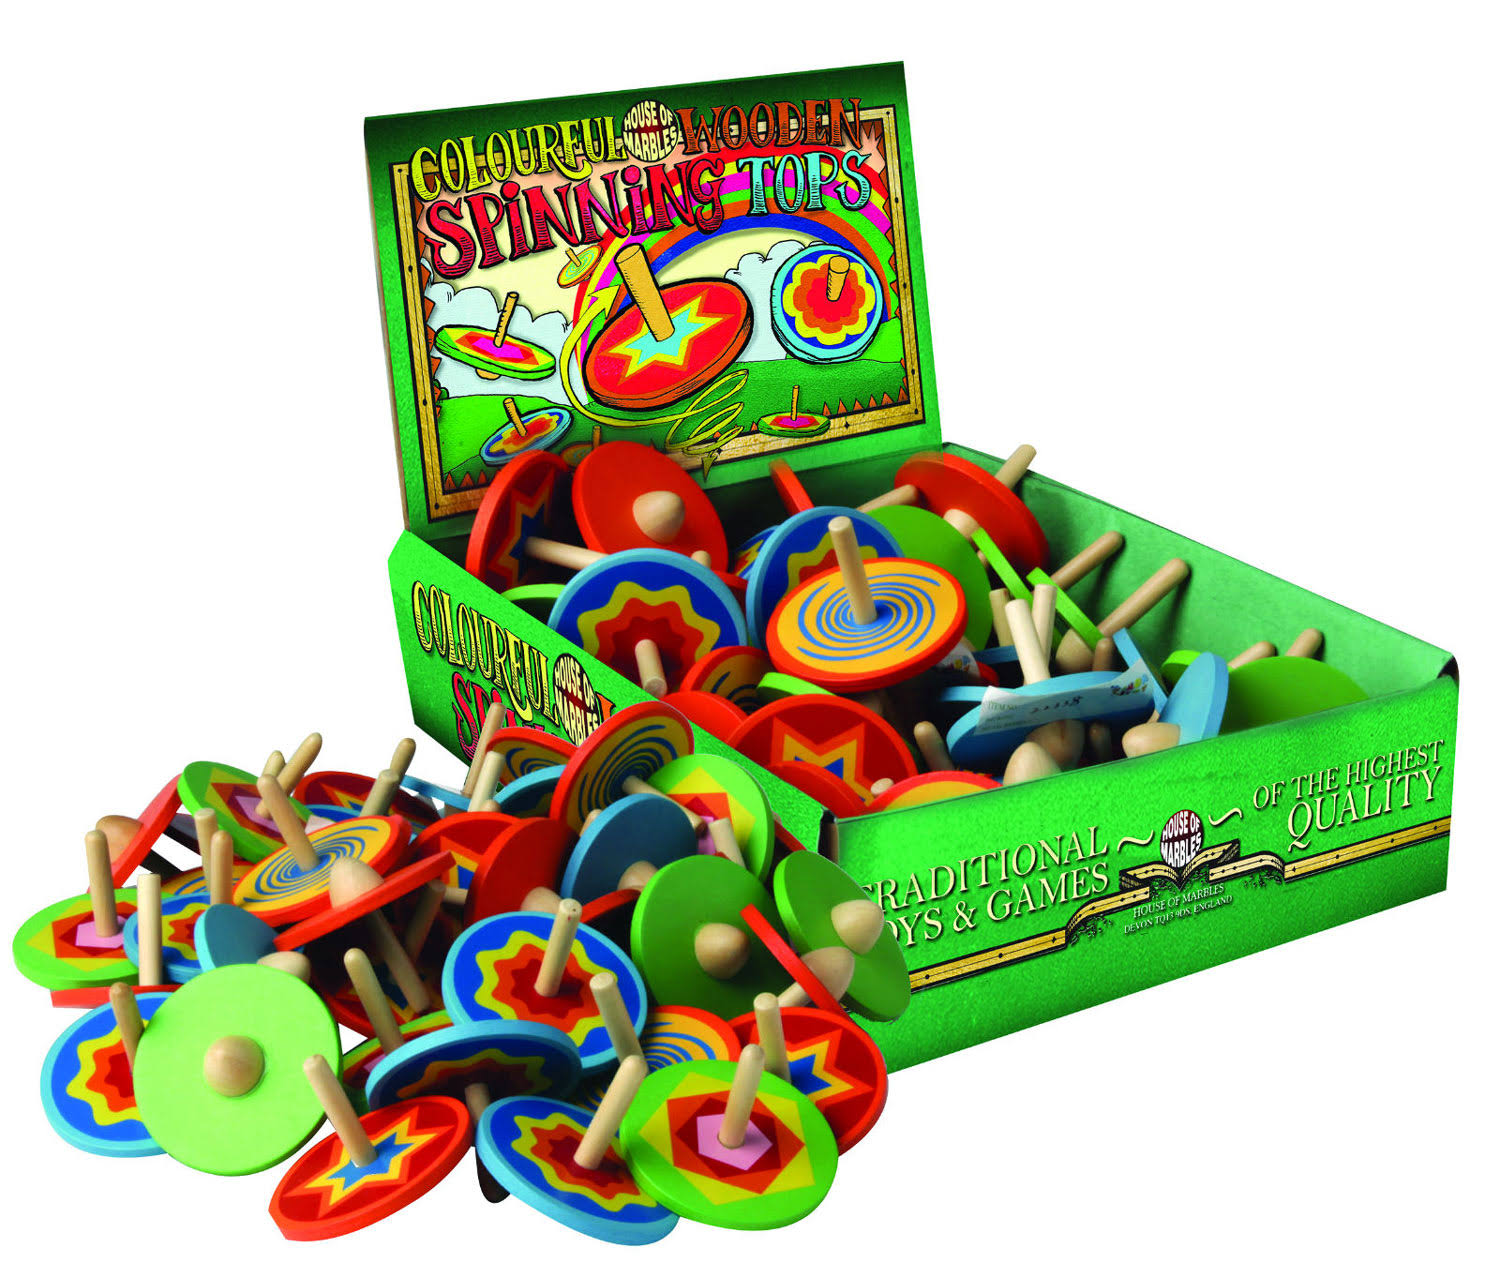 House of Marbles 24 Wooden Spinning Tops